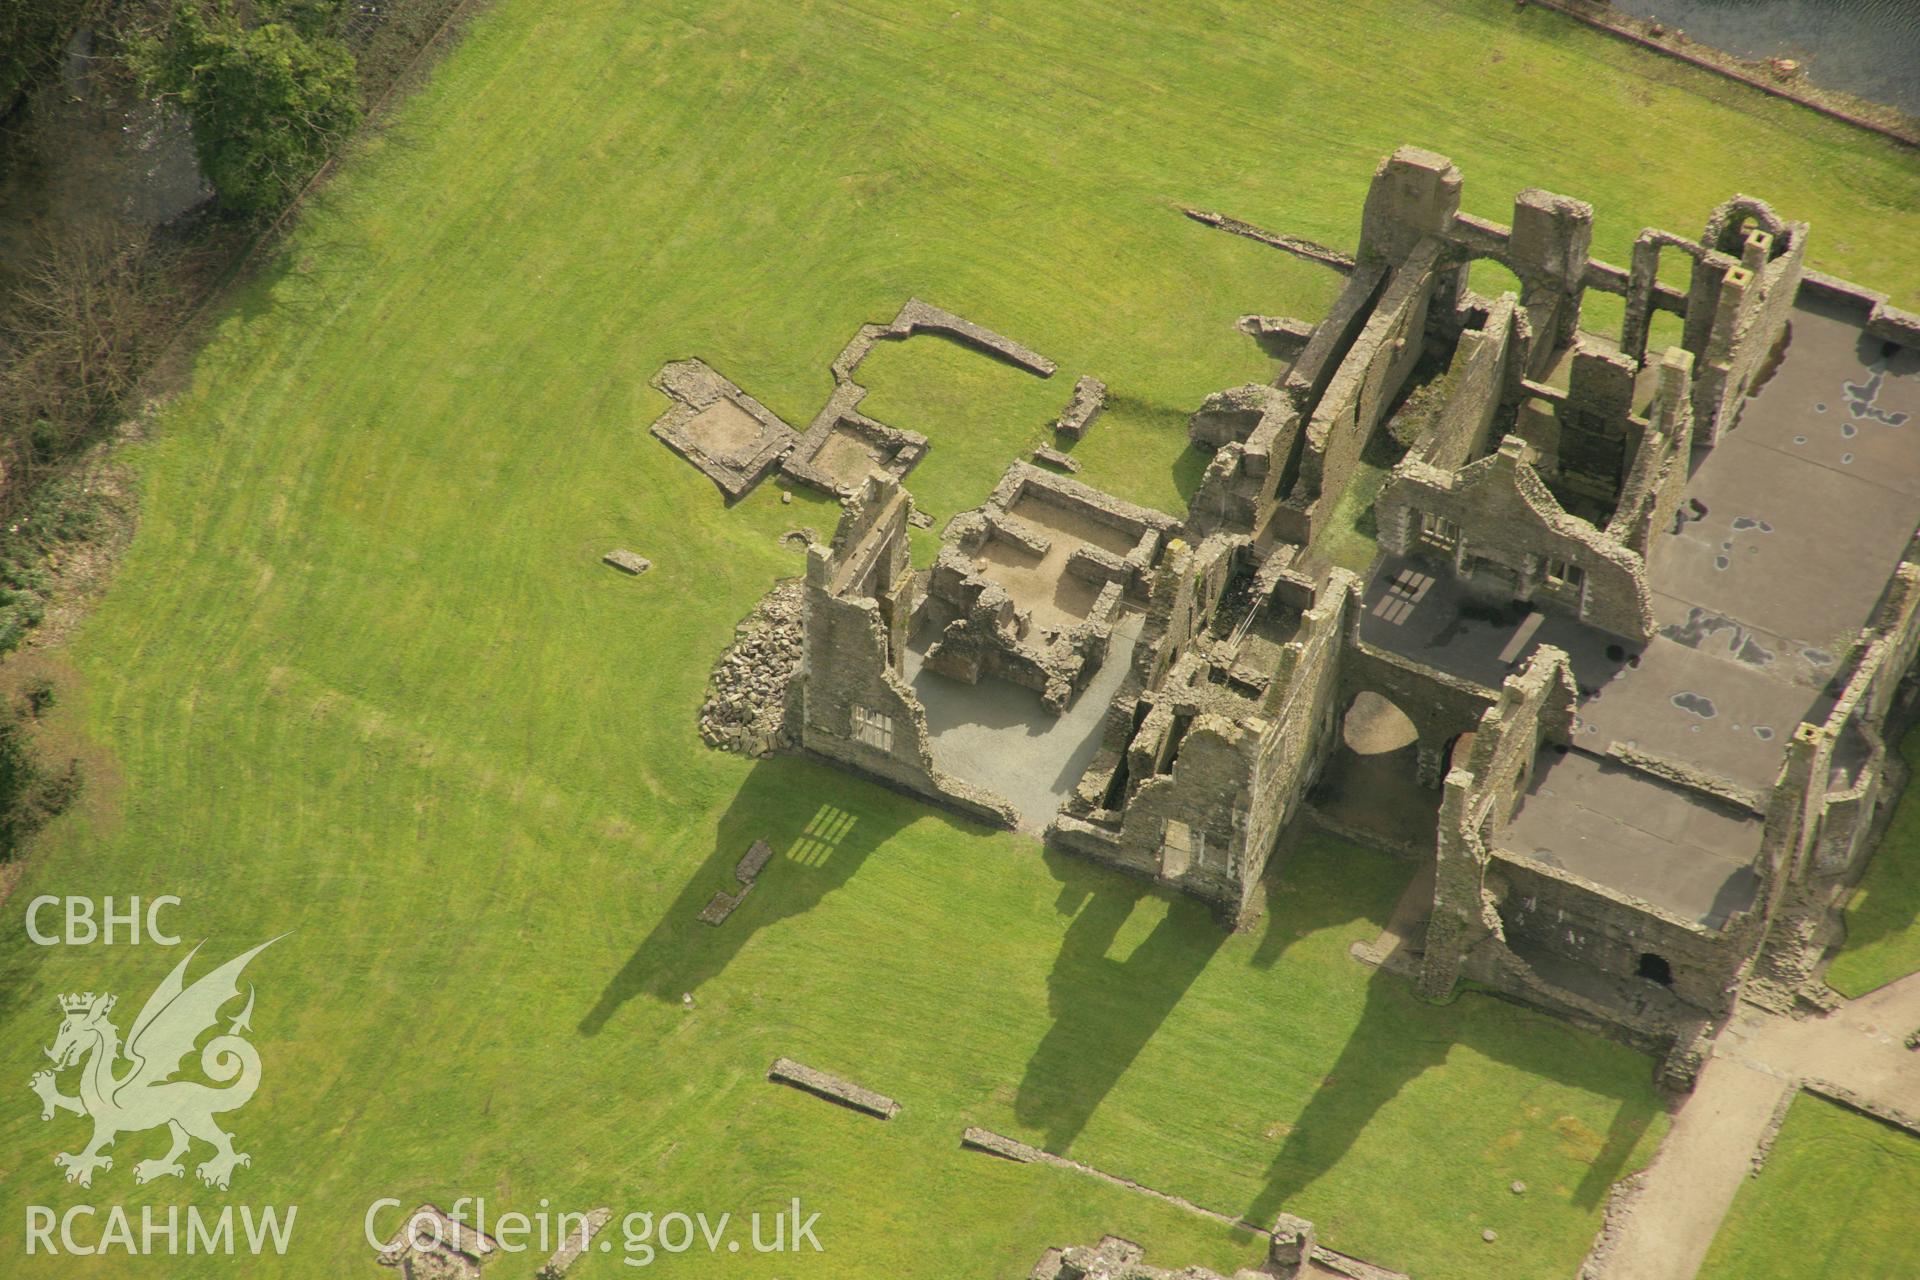 RCAHMW colour oblique aerial photograph of Neath Abbey. Taken on 16 March 2007 by Toby Driver